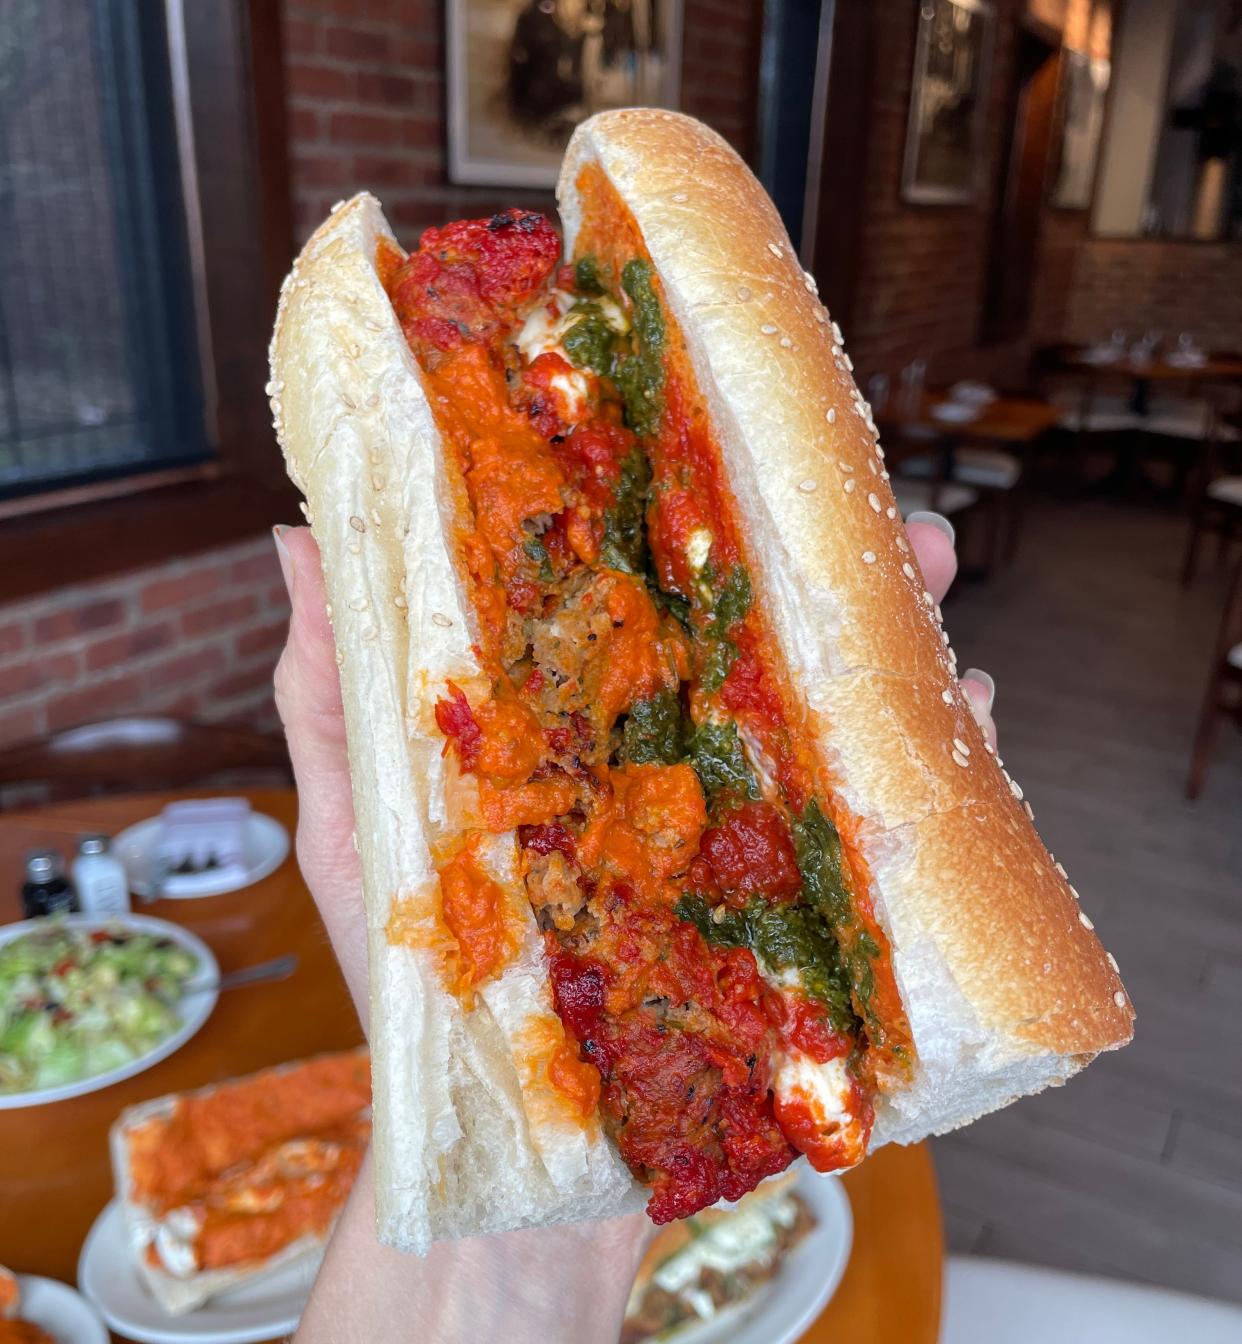 The Tri-Color Meatball Sub at Jimmy's Family Kitchen.